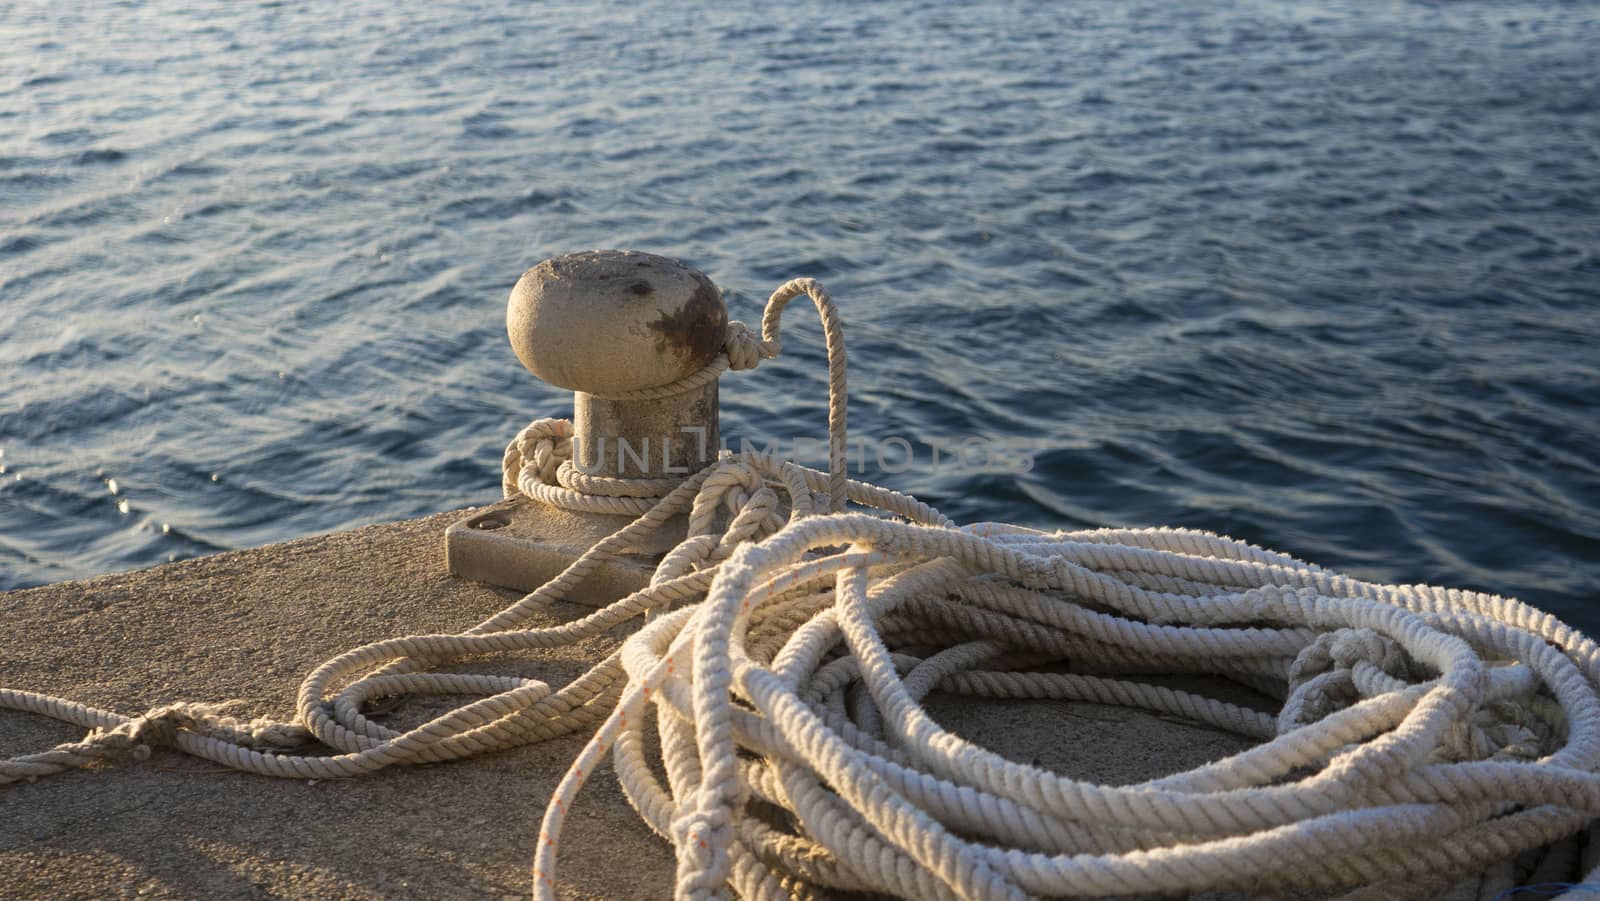 Backlight foreground at sunrise or sunset of a mooring bollard with the rope tied and resting on the ground and various boats in the background in back light